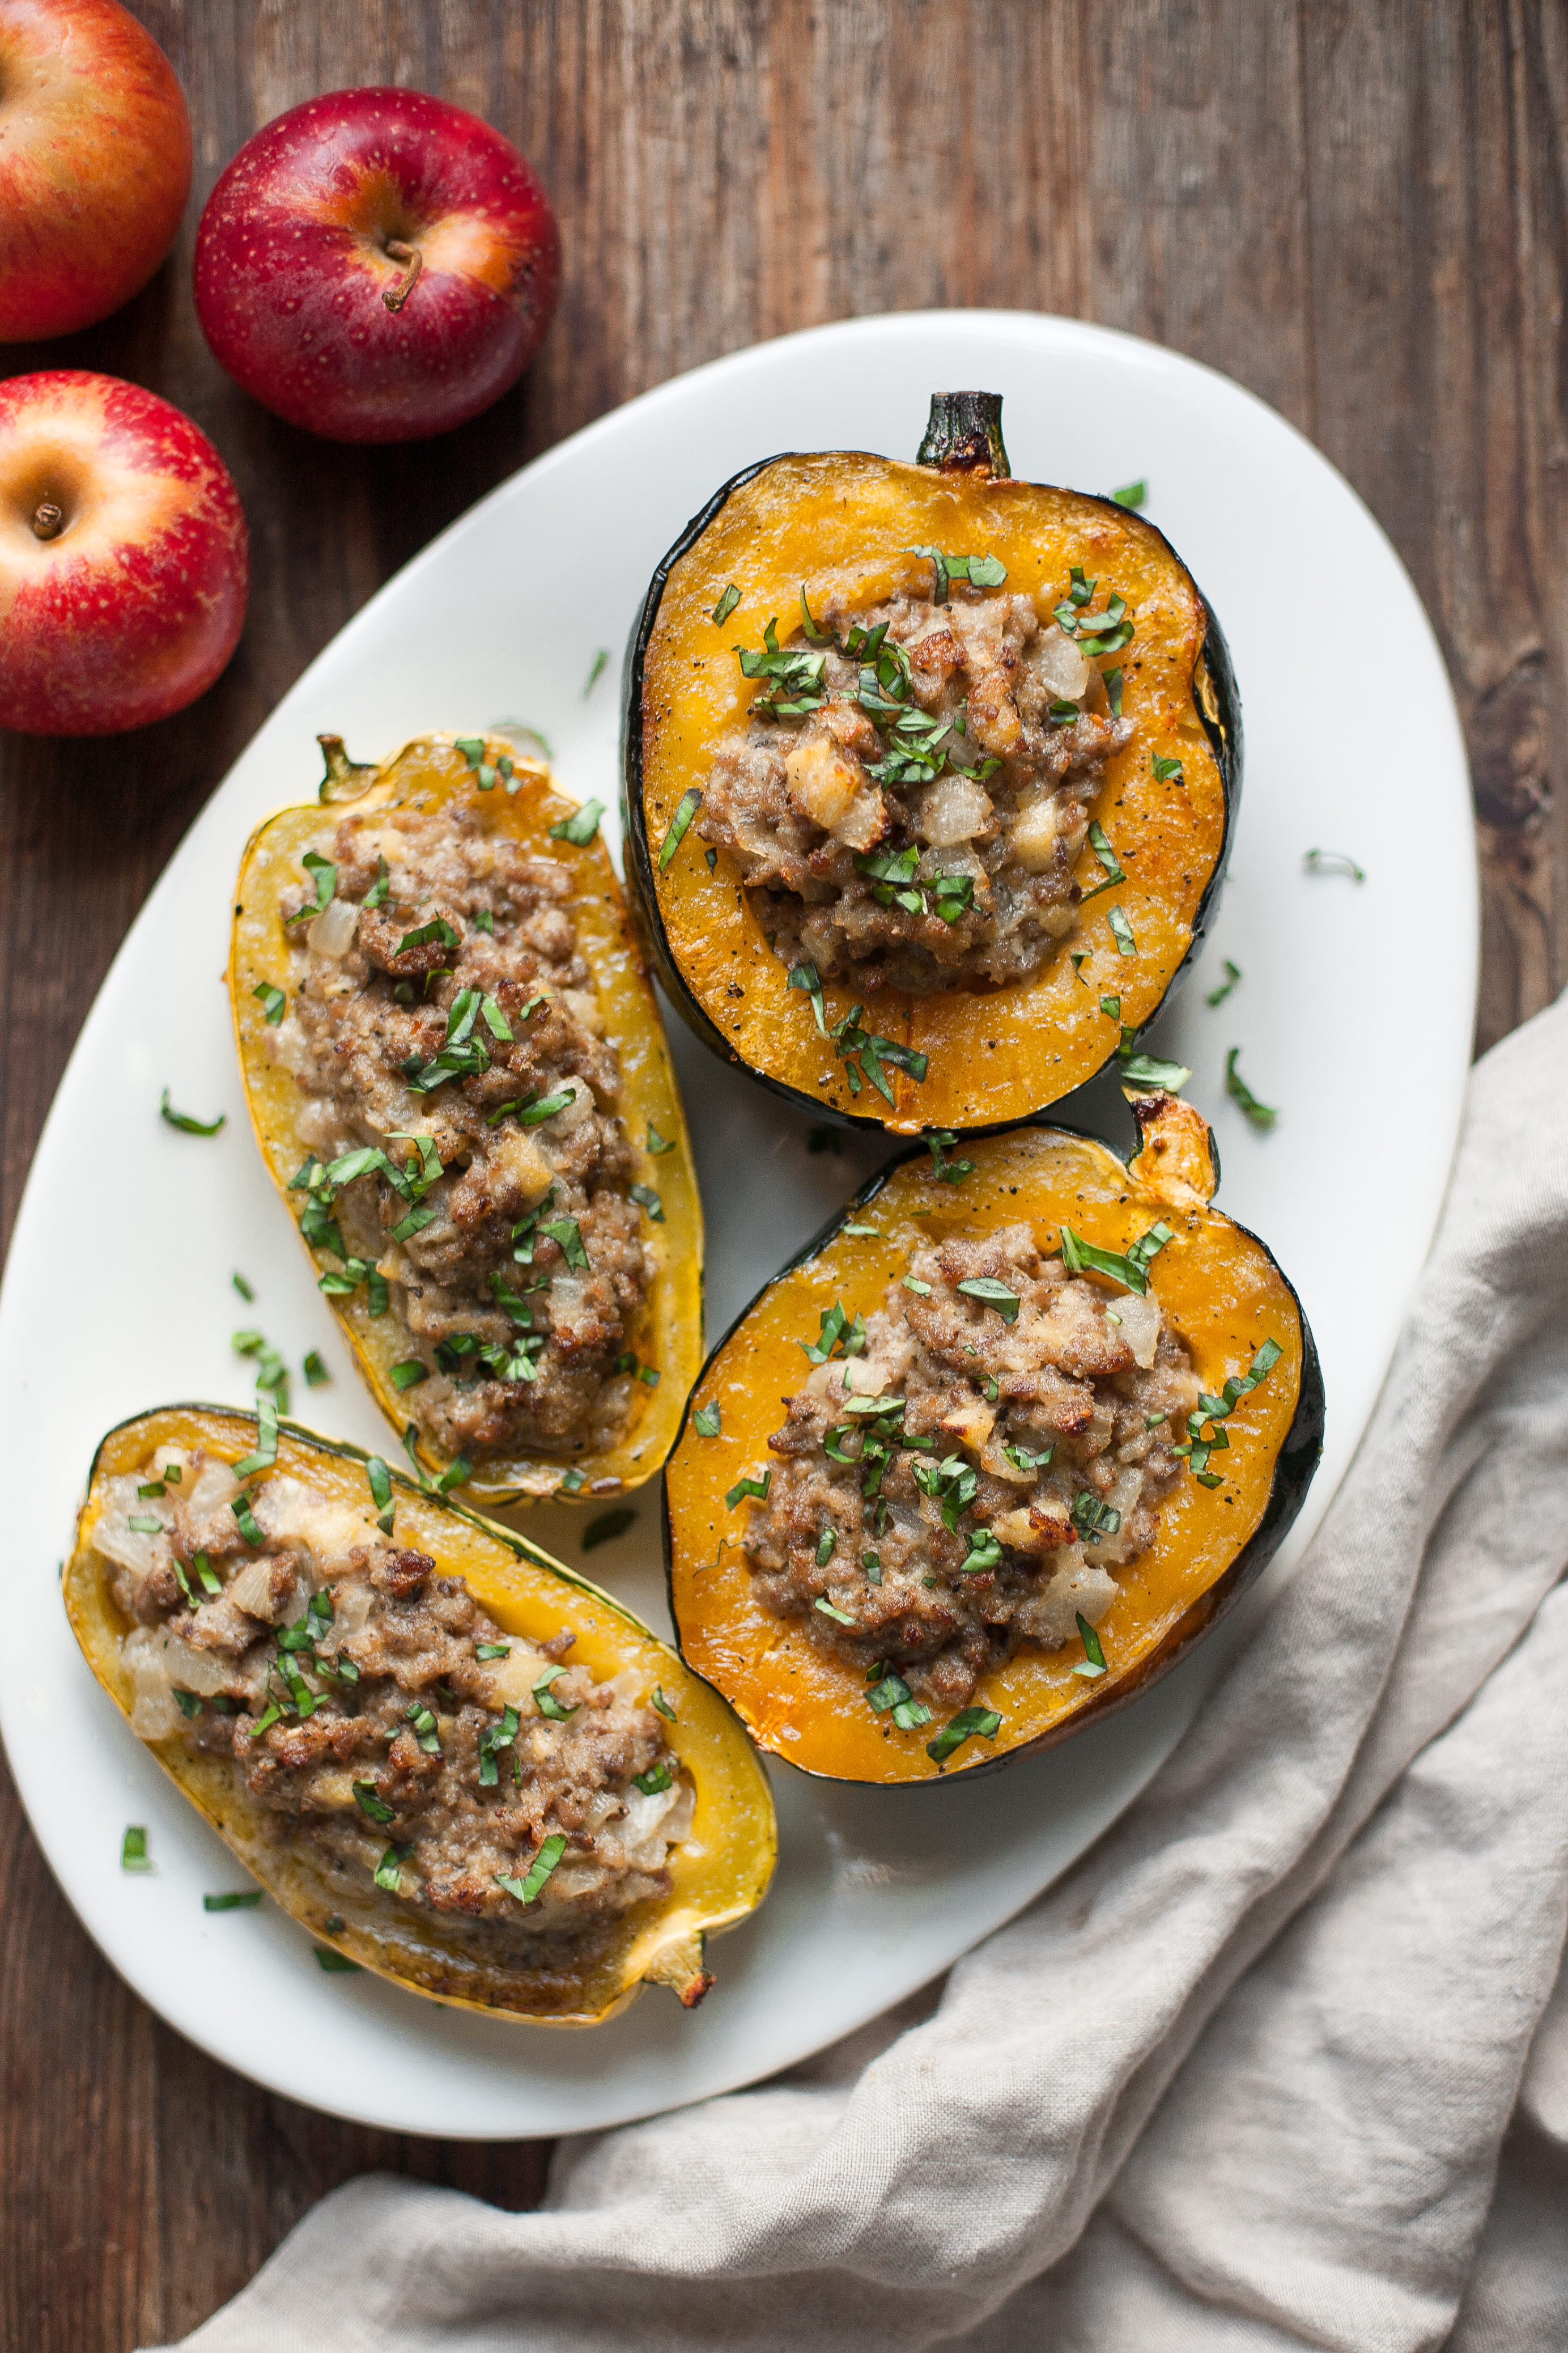 Stuffed Squash with Sausage and Apples